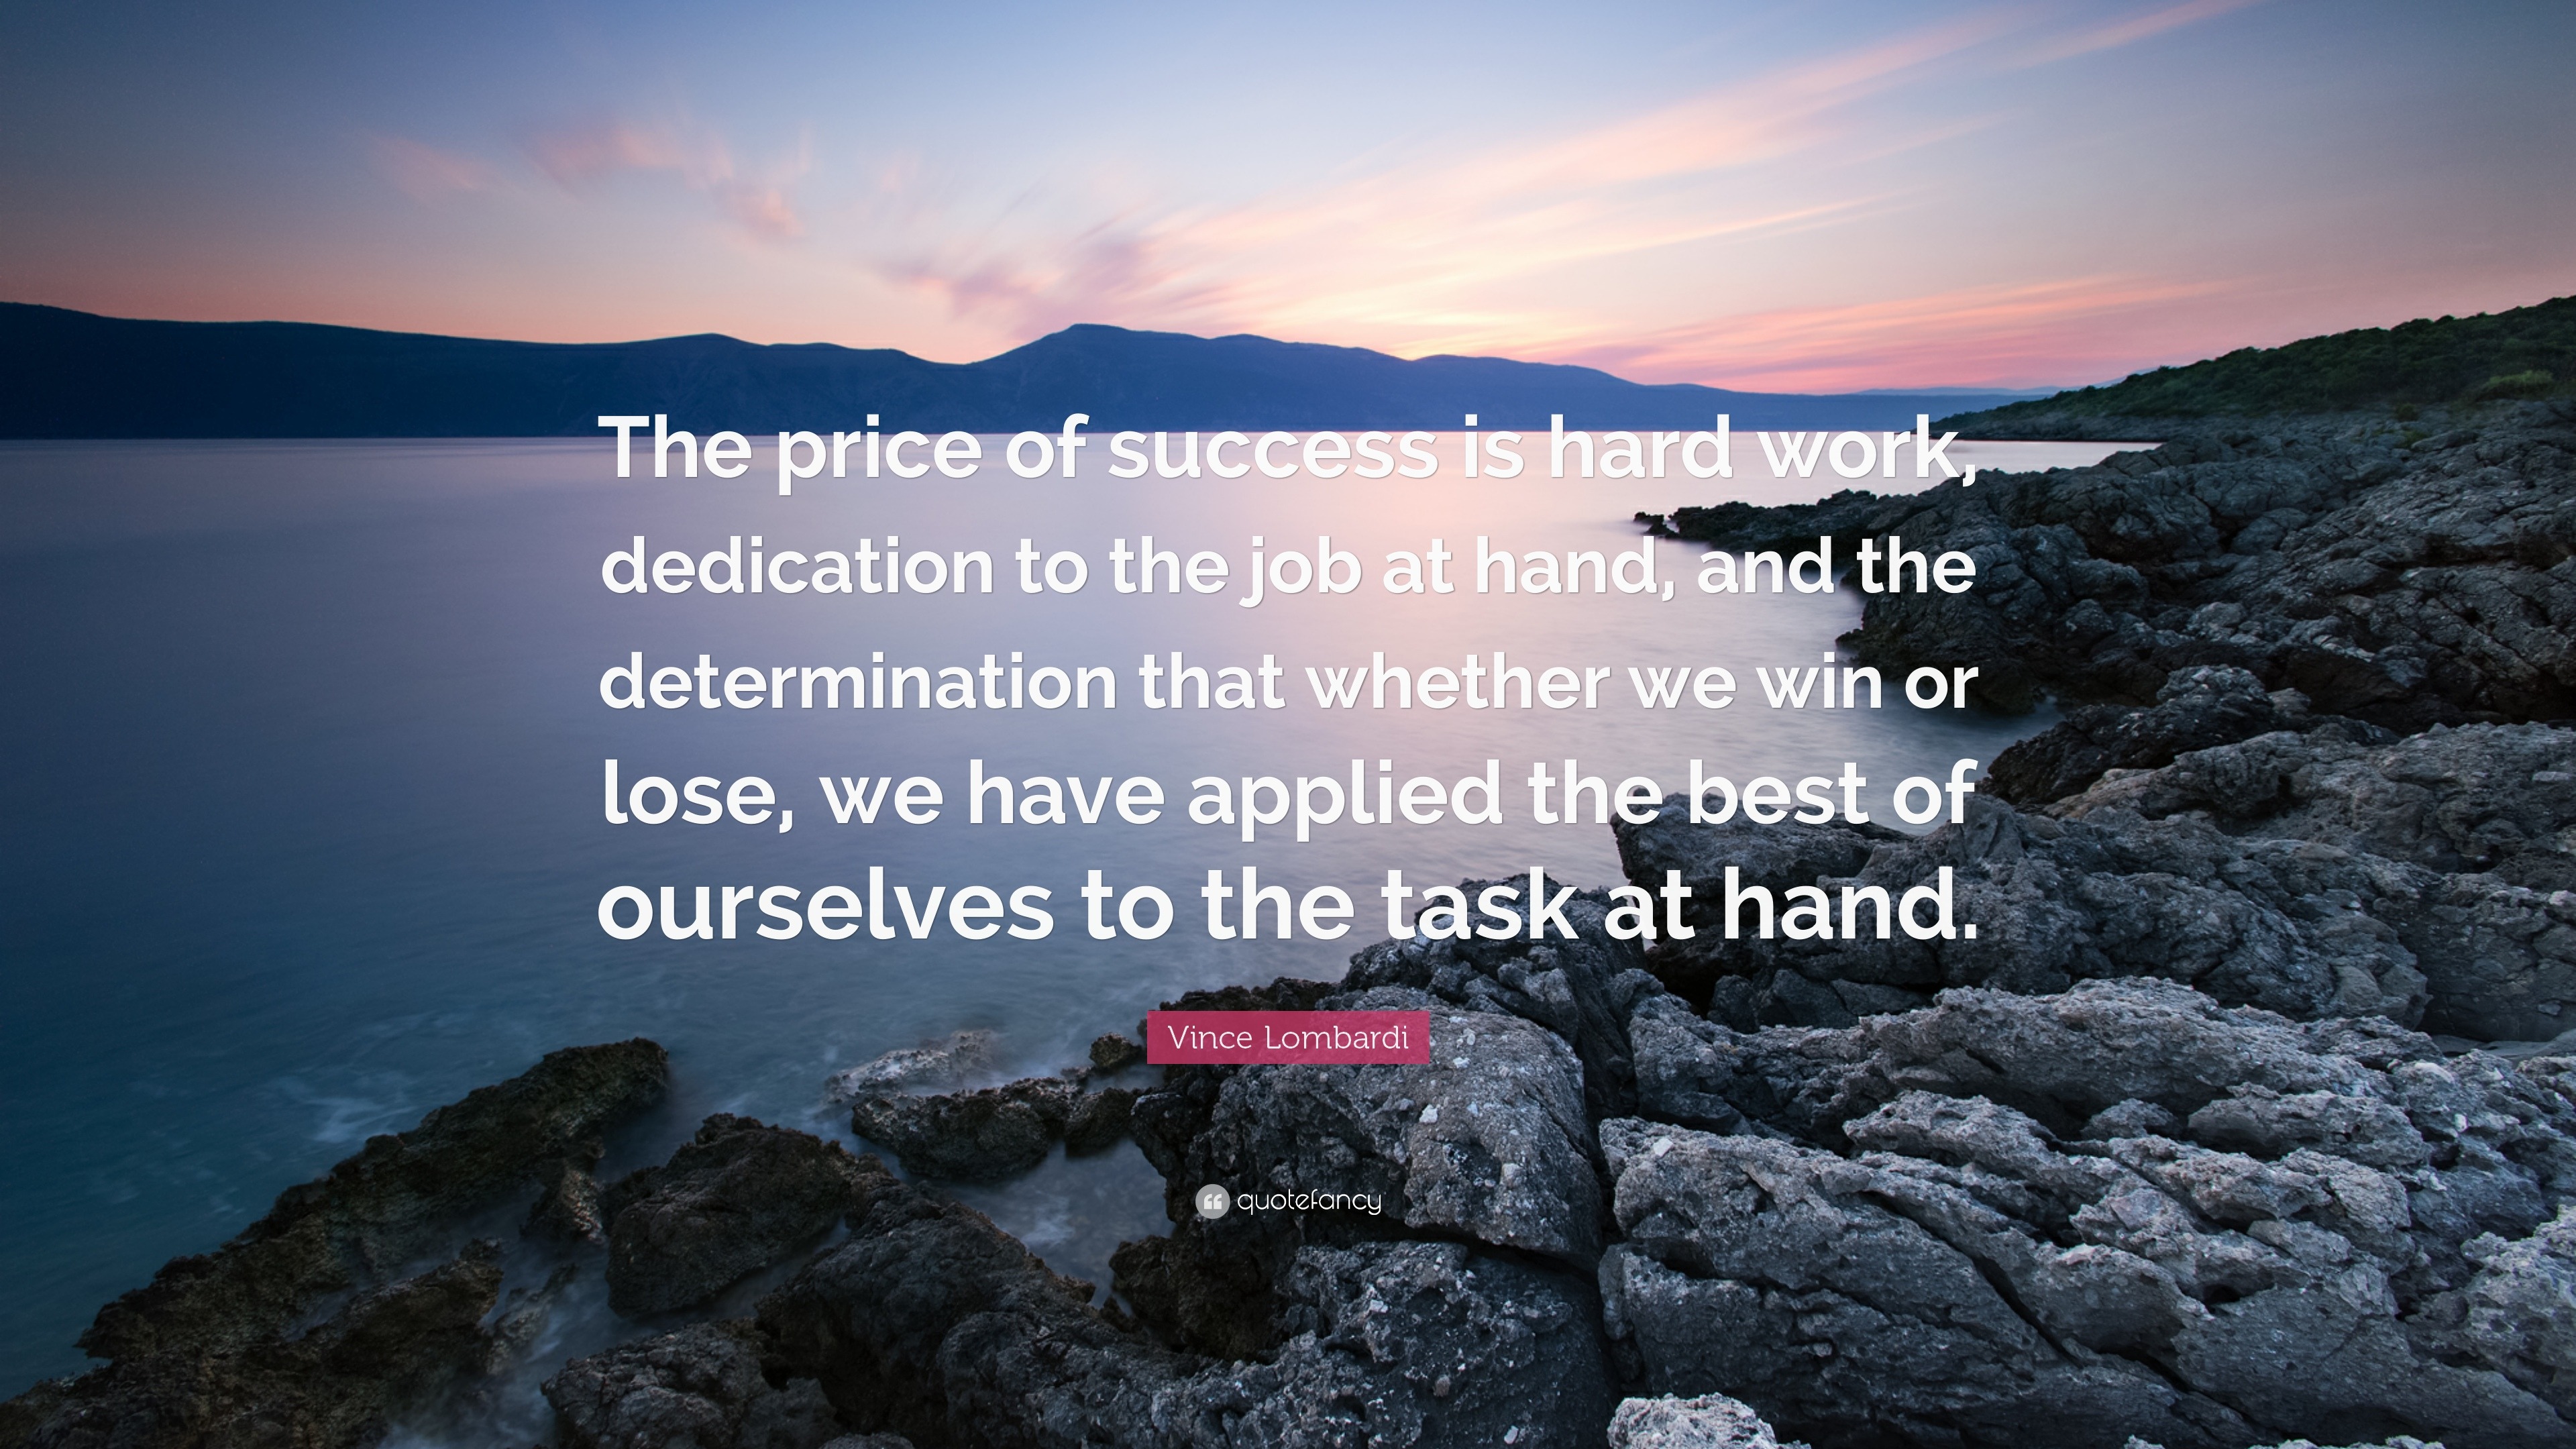 Vince Lombardi Quote: “The price of success is hard work, dedication to